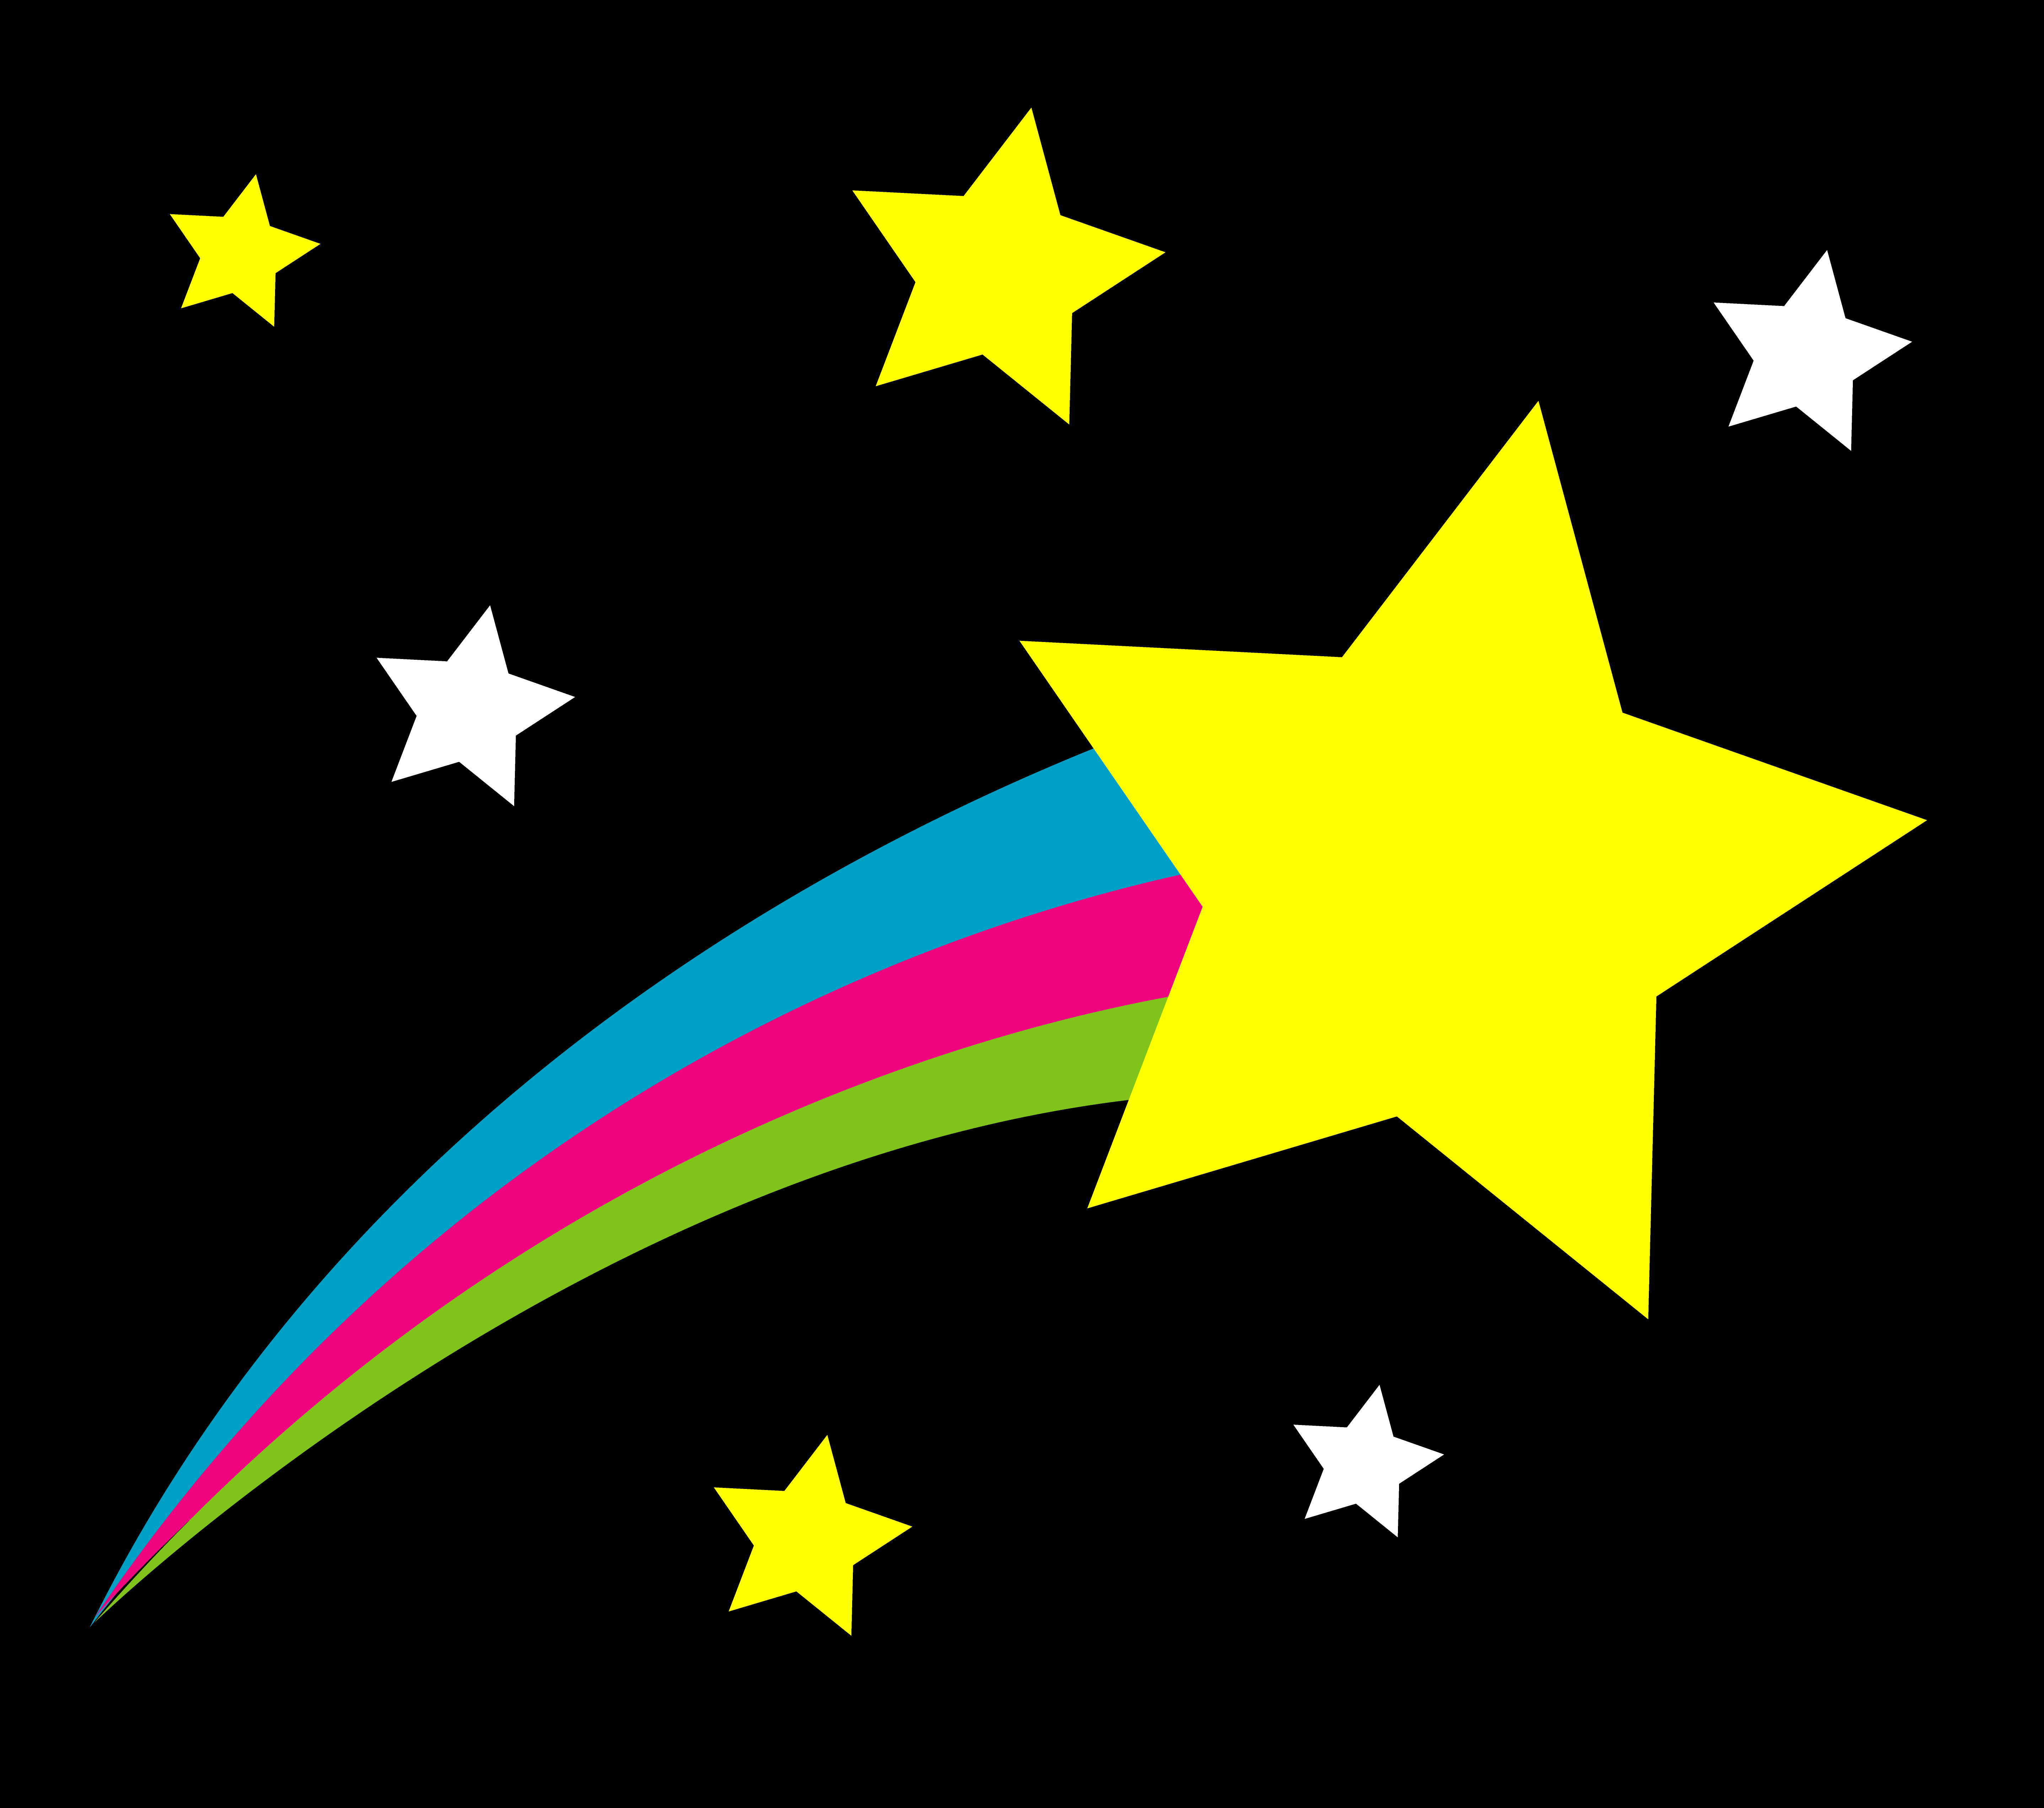 Shooting Stars Animated - ClipArt Best